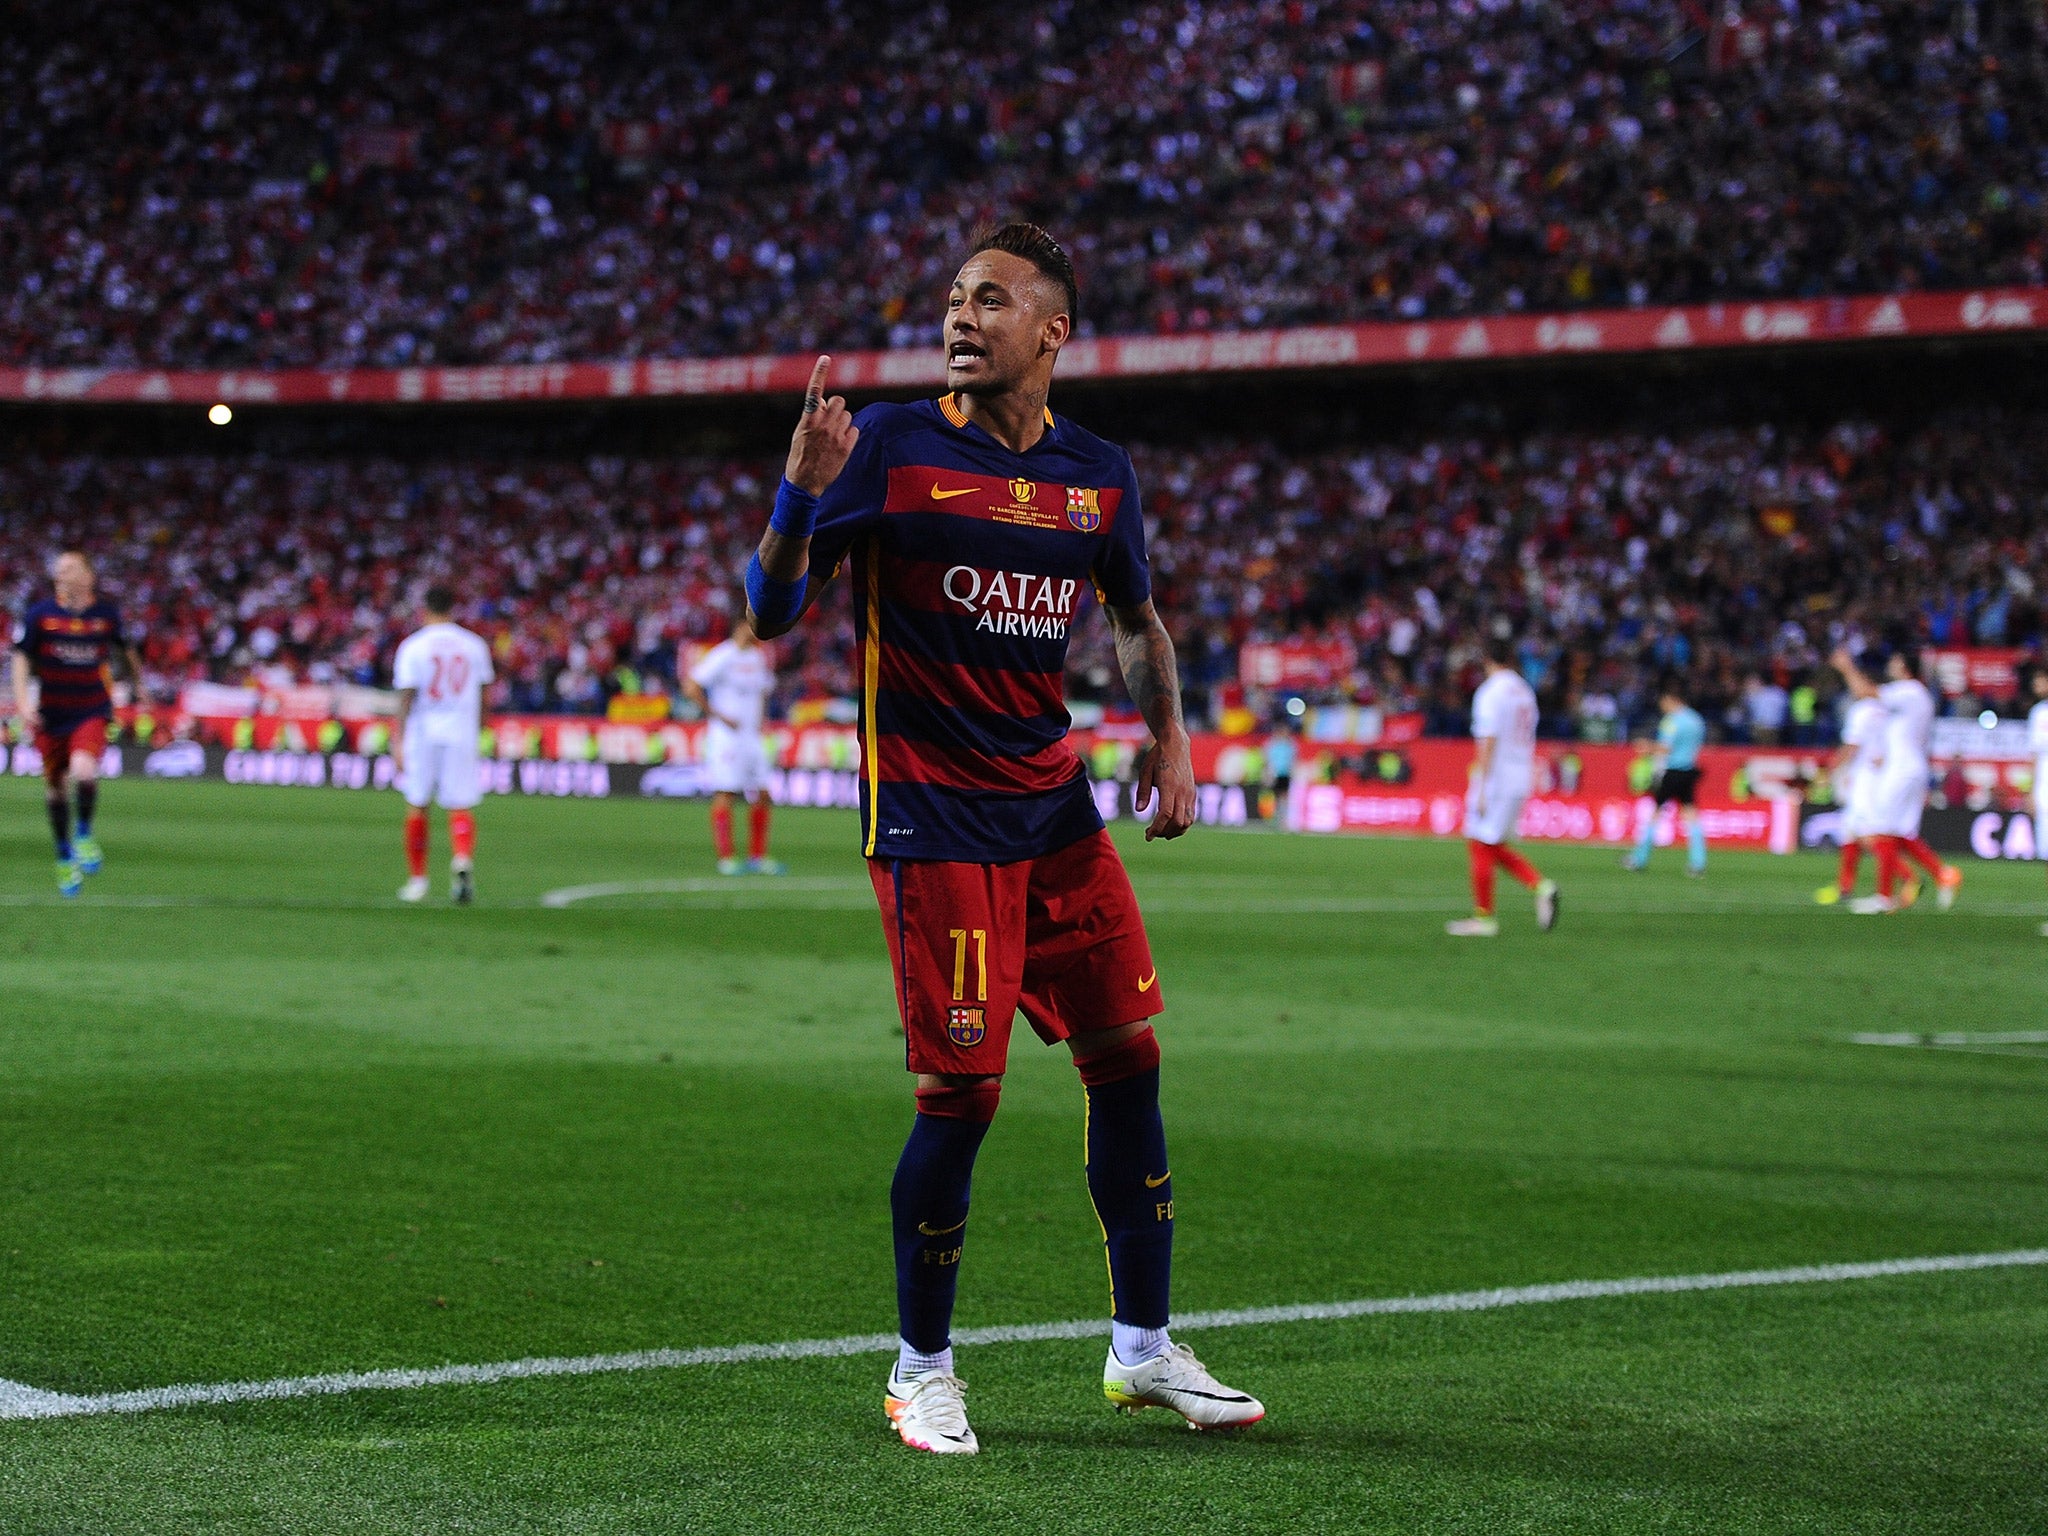 Neymar will sign a new contract with Barcelona to stay at the club for 'a long time'